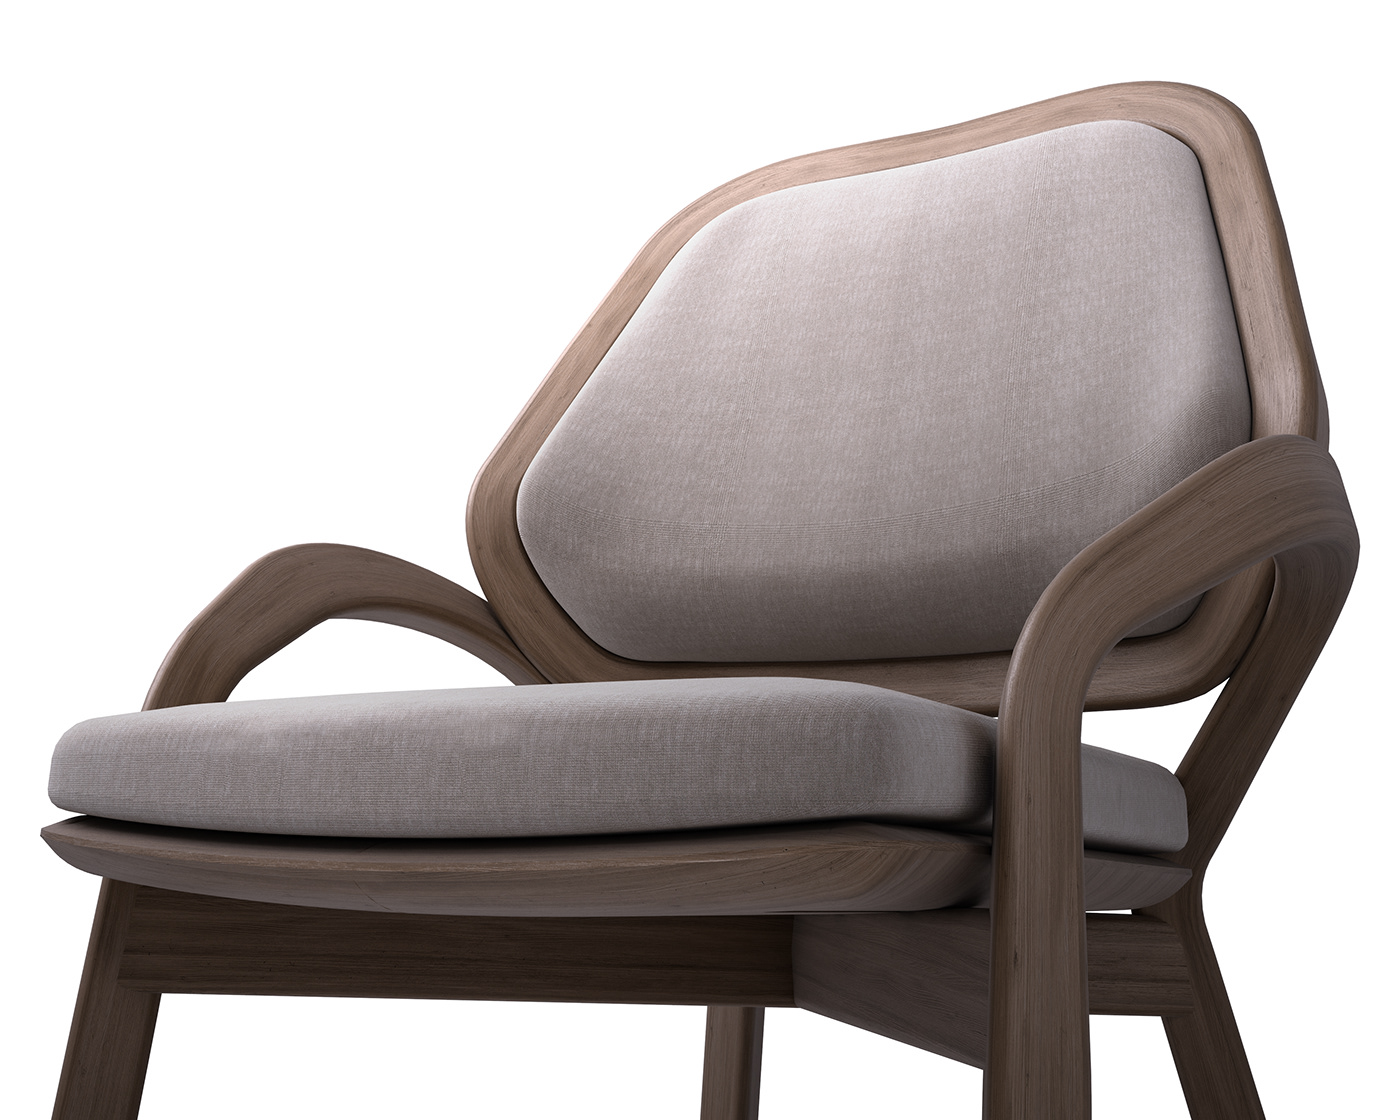 furniture modern vray SketchUP Render architecture visualization chair chair design